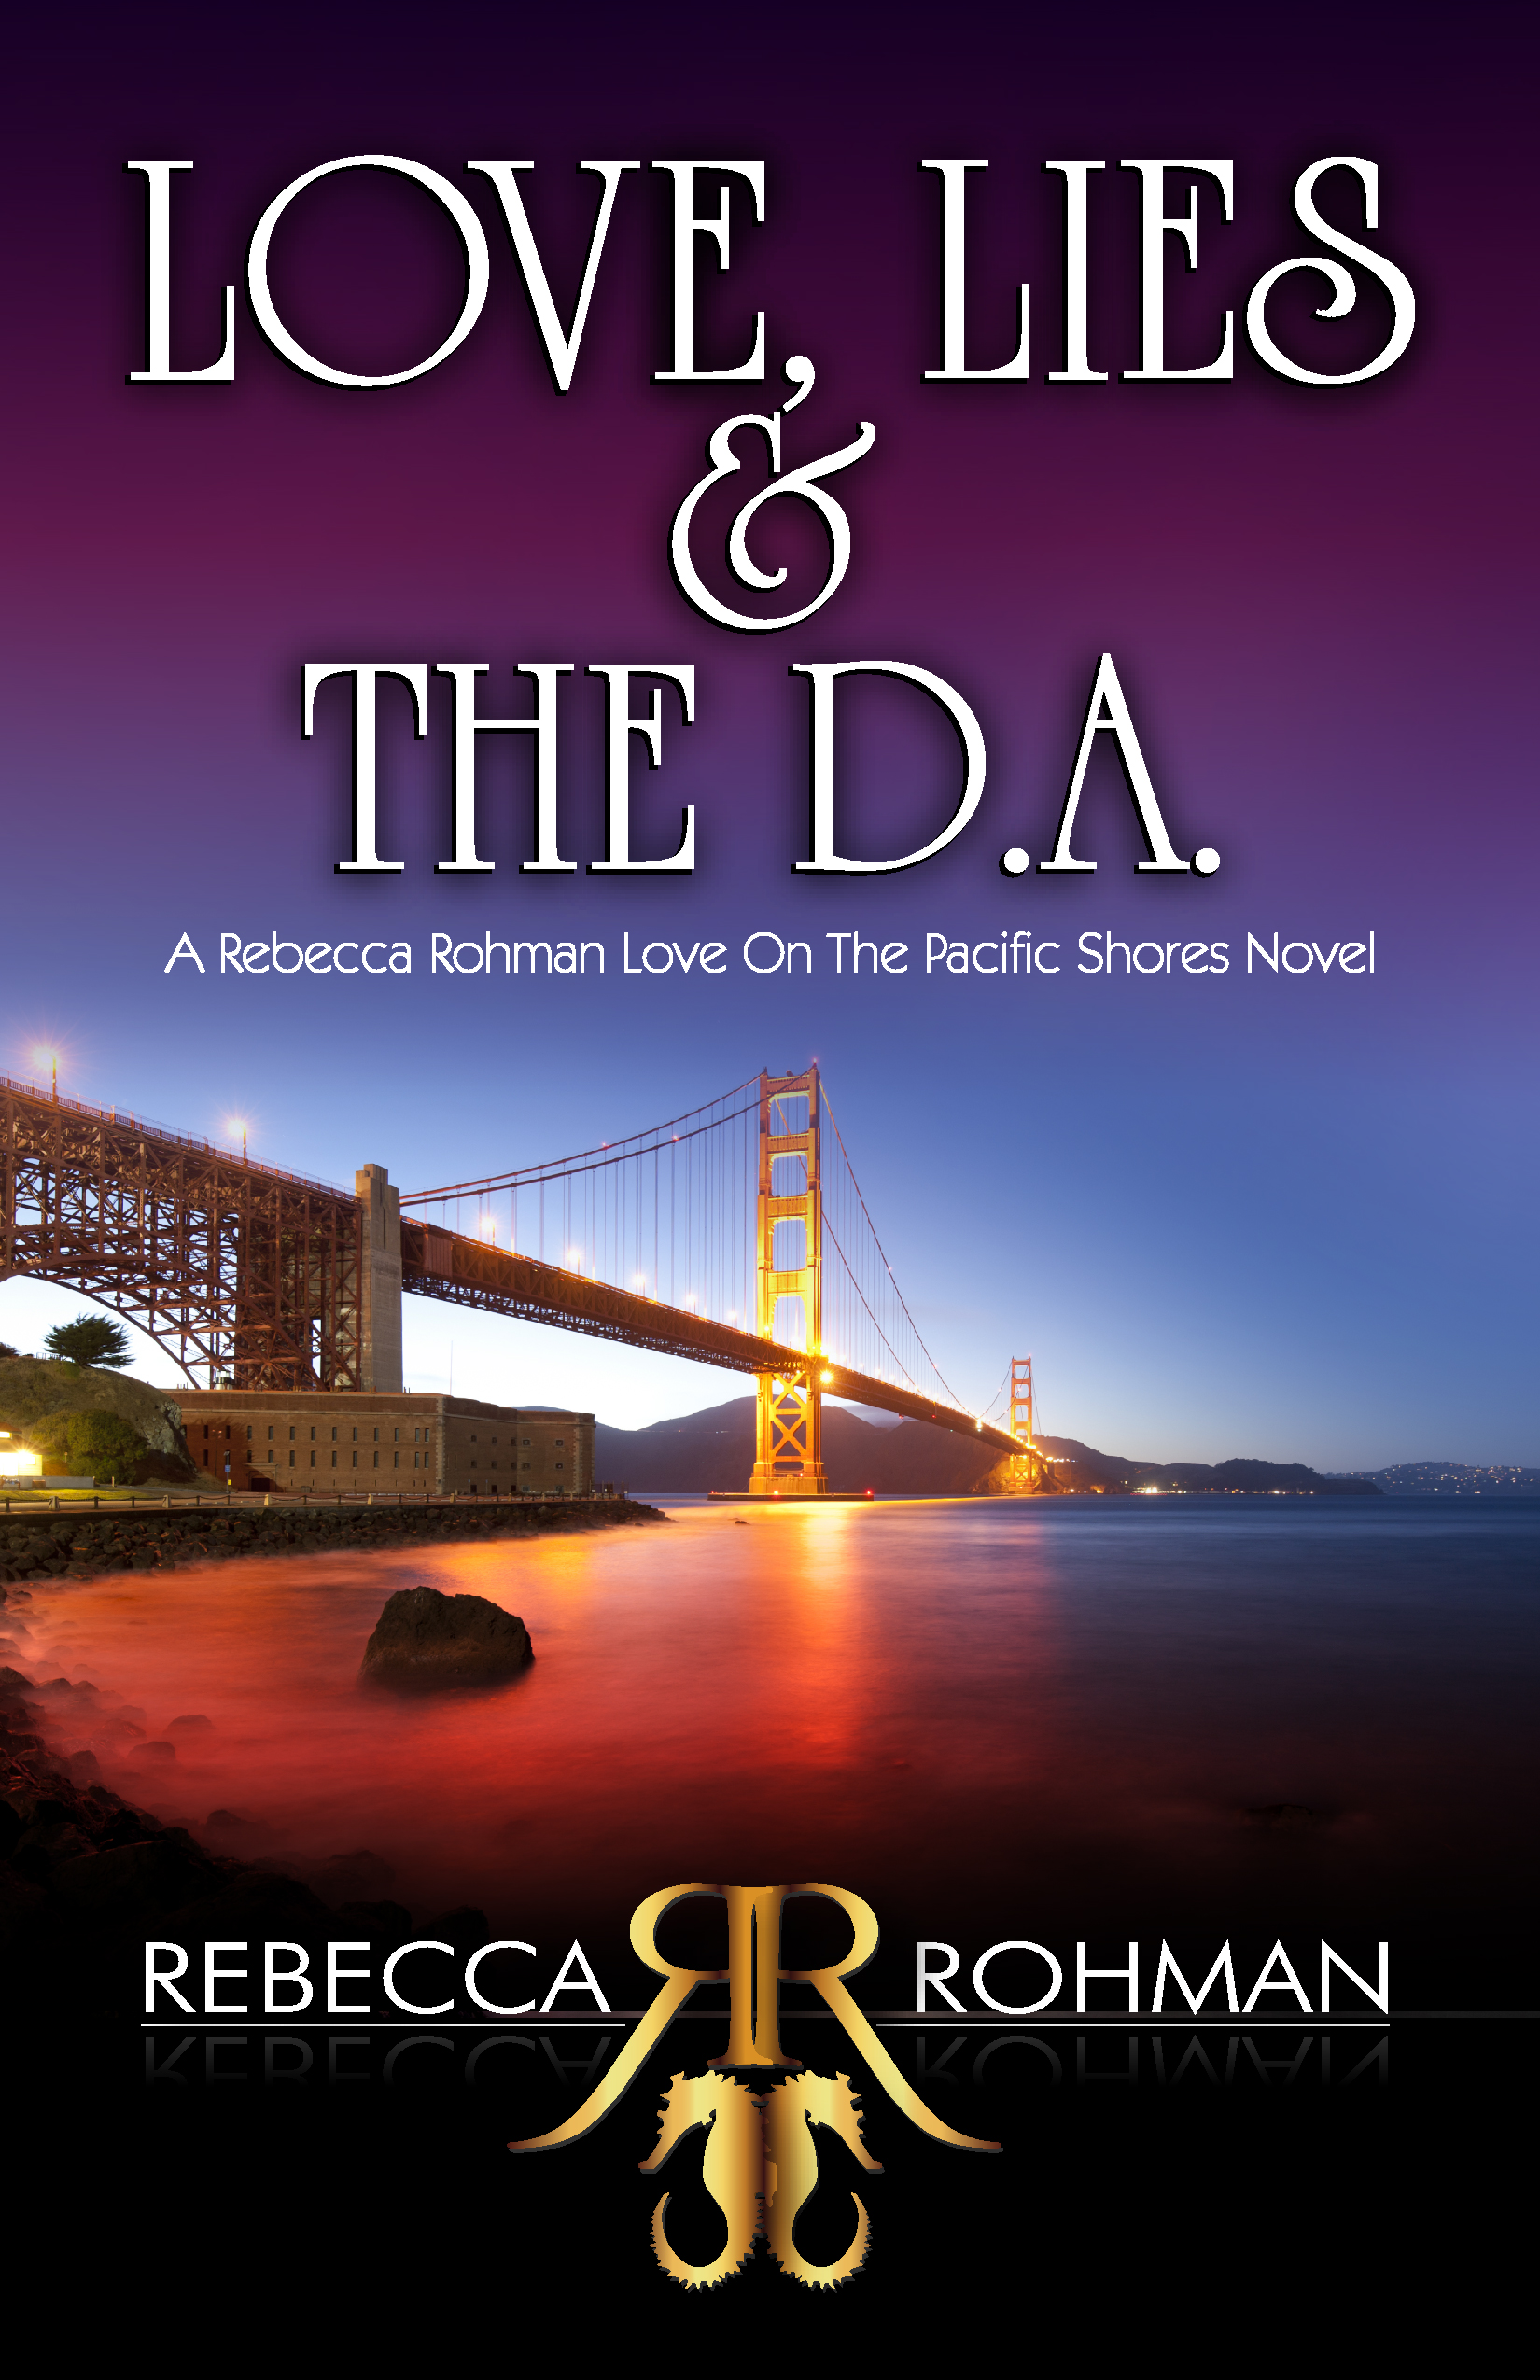 Love, Lies & The D.A. Autographed Paperback - NEW COVER